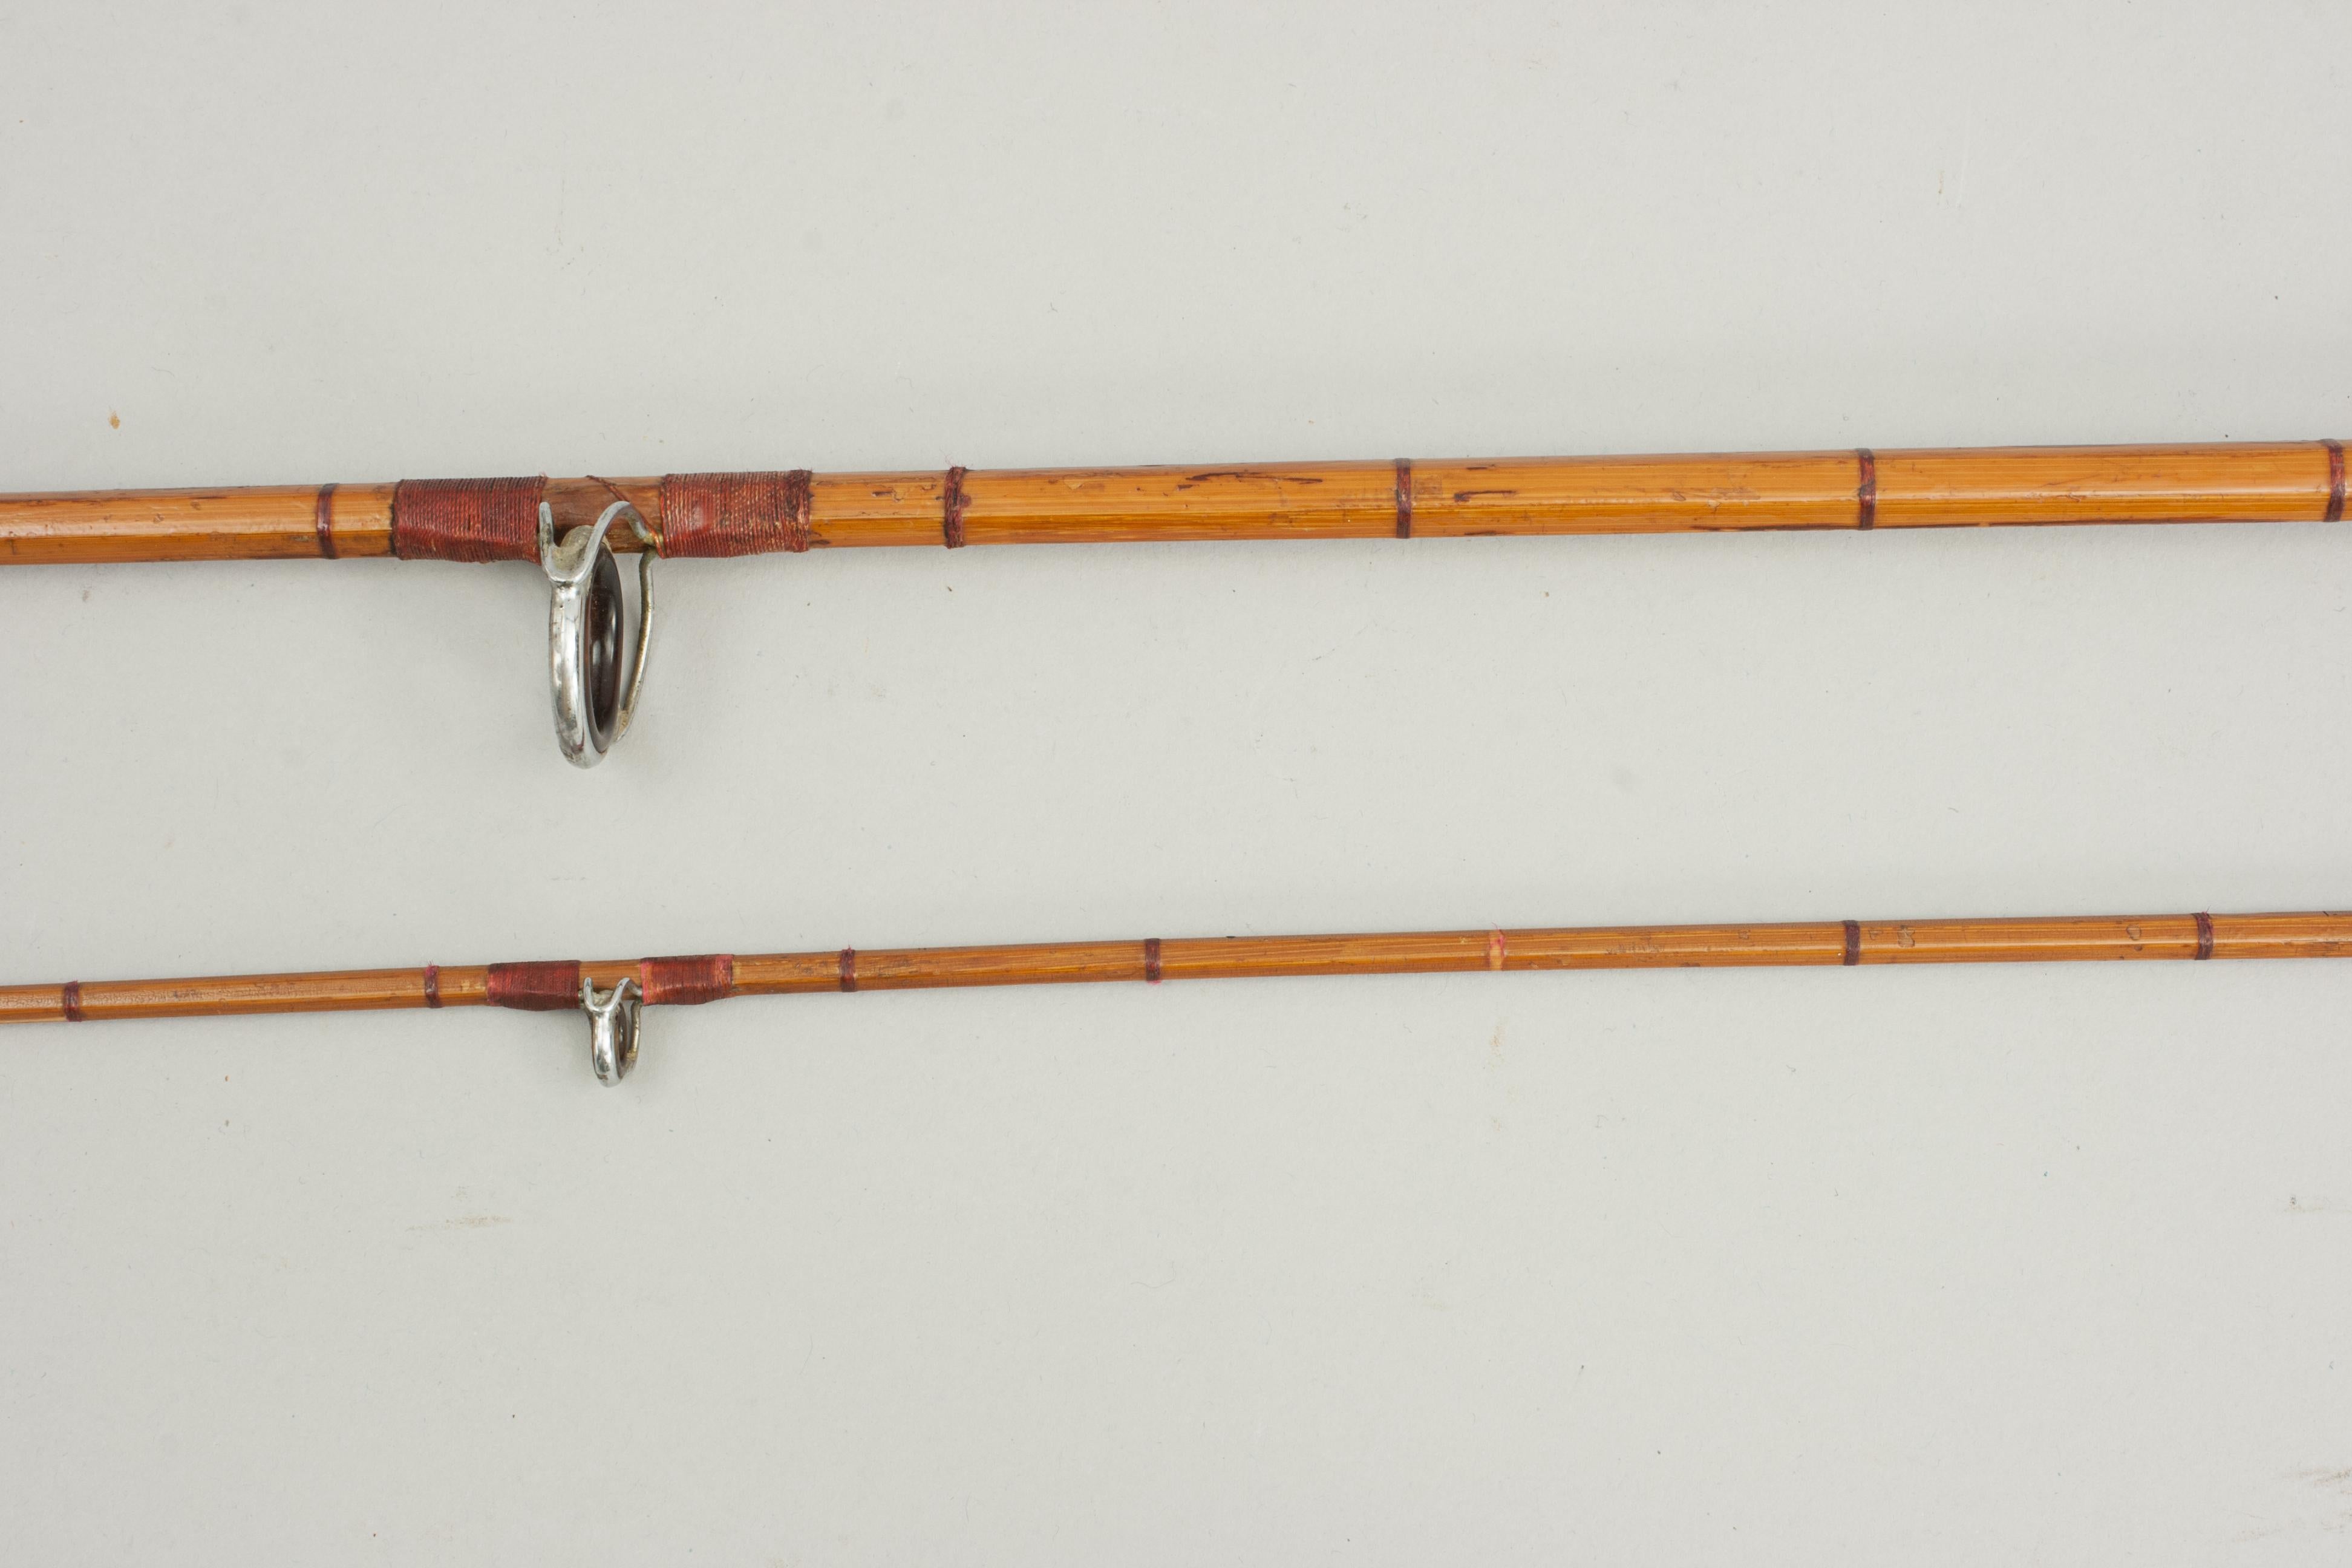 Mid-20th Century Vintage Allcock Fly Fishing Rod For Sale